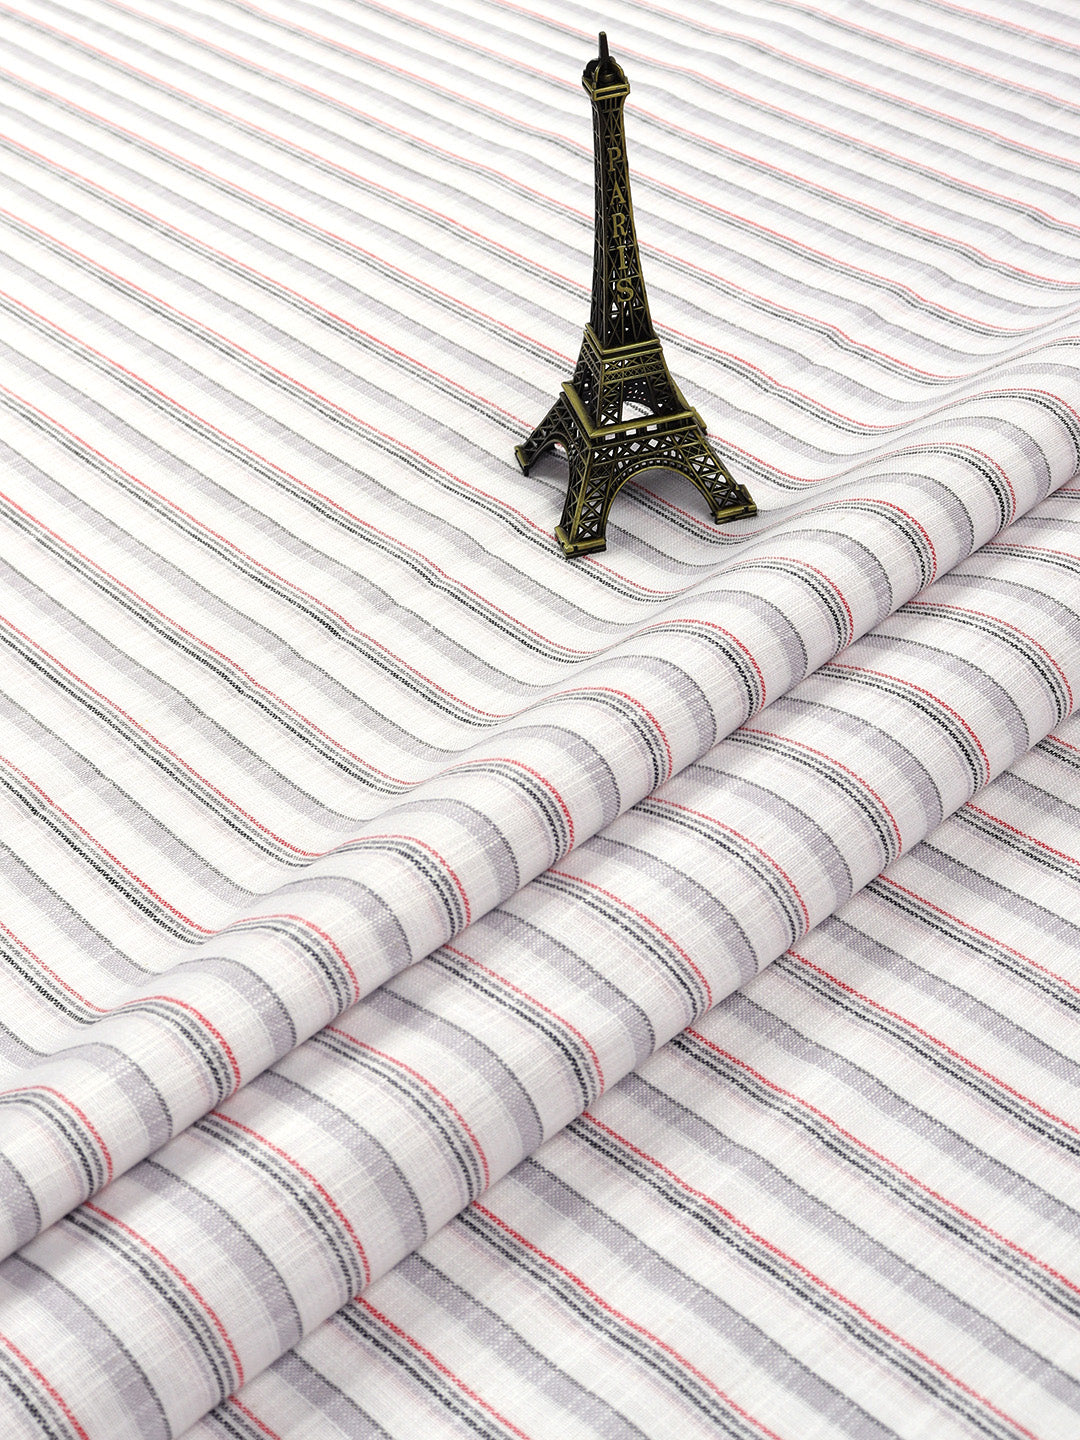 Cotton Colour Striped White & Grey Shirting Fabric High Style-Close view